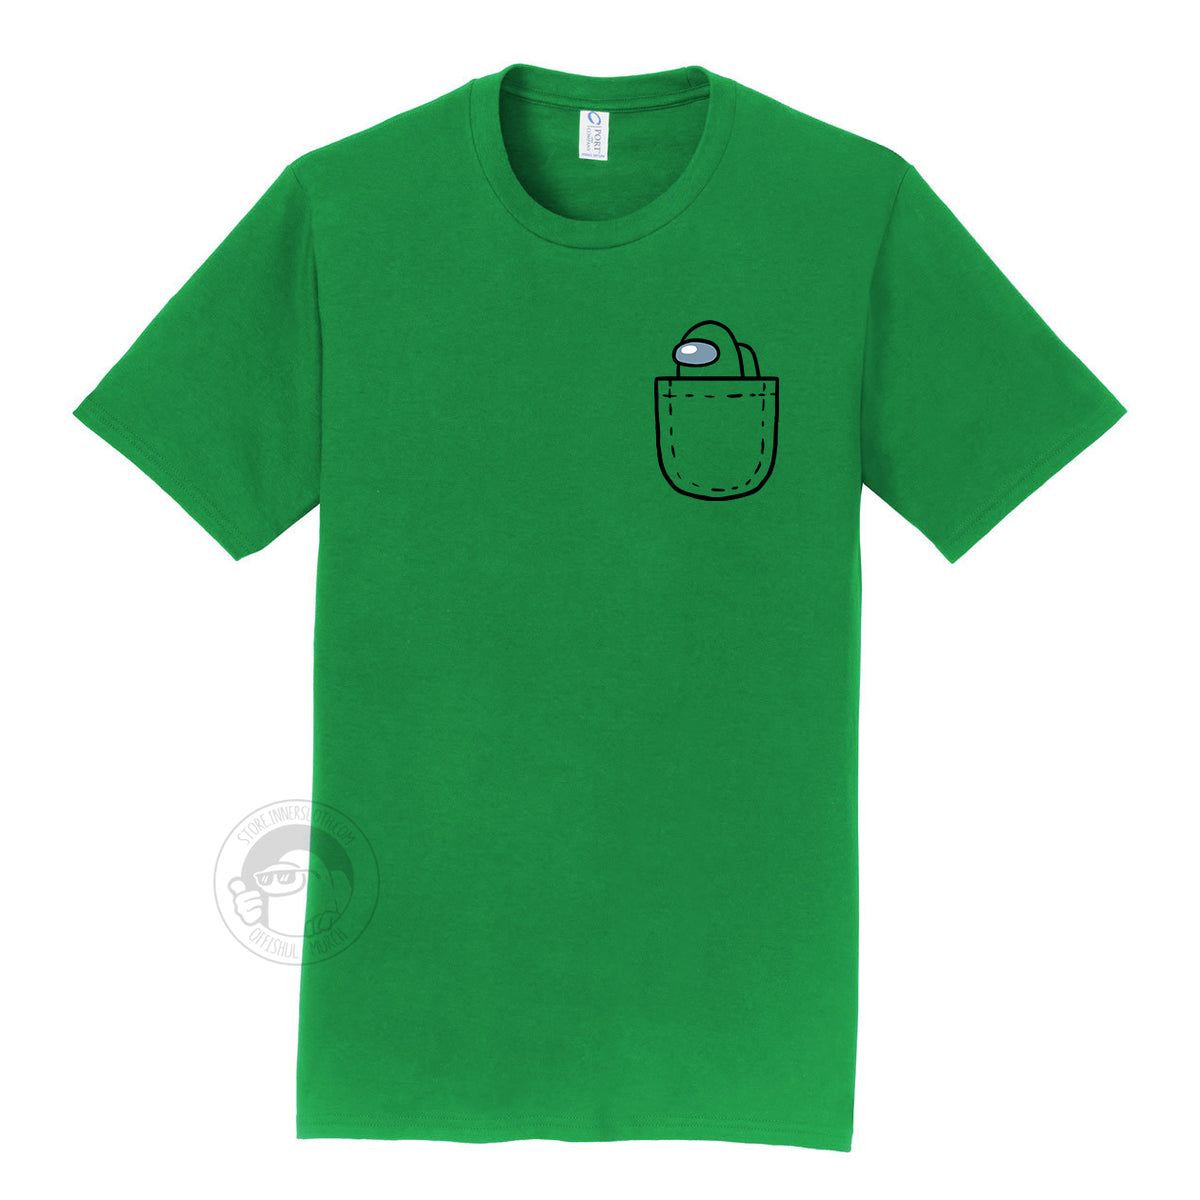 A product photograph of the Among Us: Mini Crewmate Pocket Tee in green. The shirt art depicts a fake pocket and a small crewmate peeking out of it. The crewmate is the same color as the rest of the shirt.